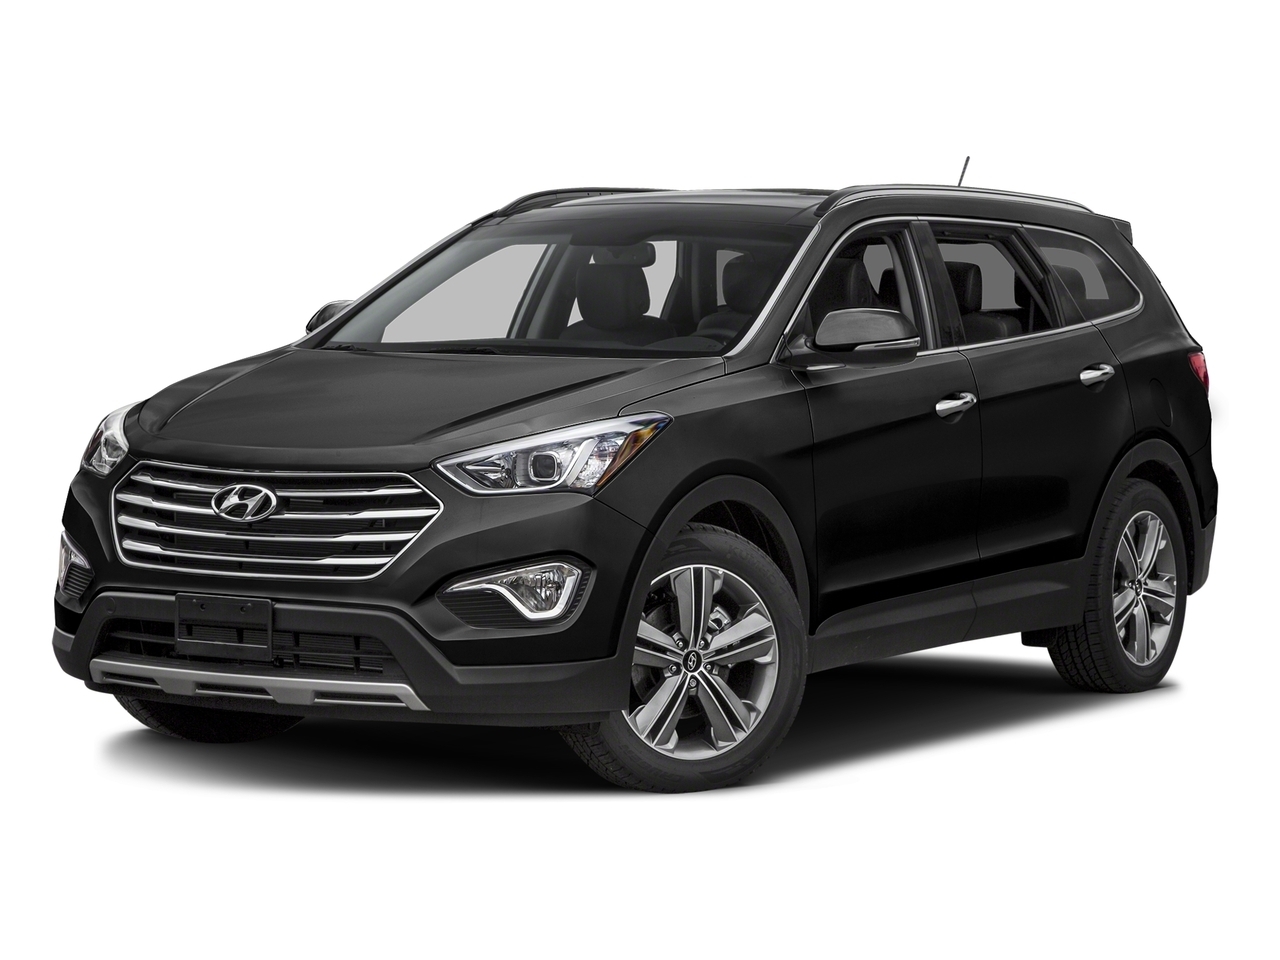 2016 Hyundai Santa Fe XL AWD Limited| 3 Rows/Leather/Pano Roof/Clean Title!